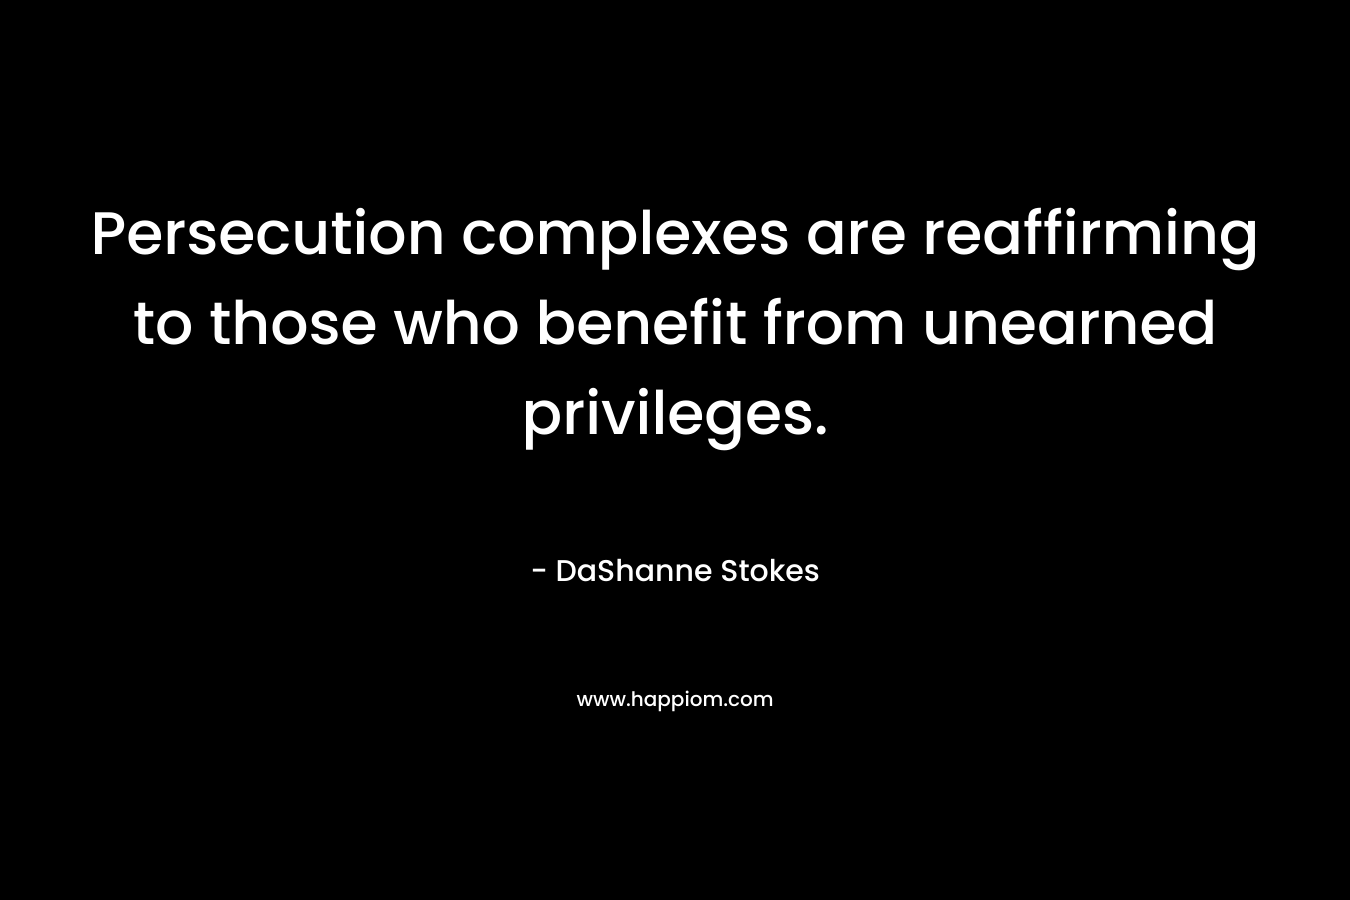 Persecution complexes are reaffirming to those who benefit from unearned privileges.